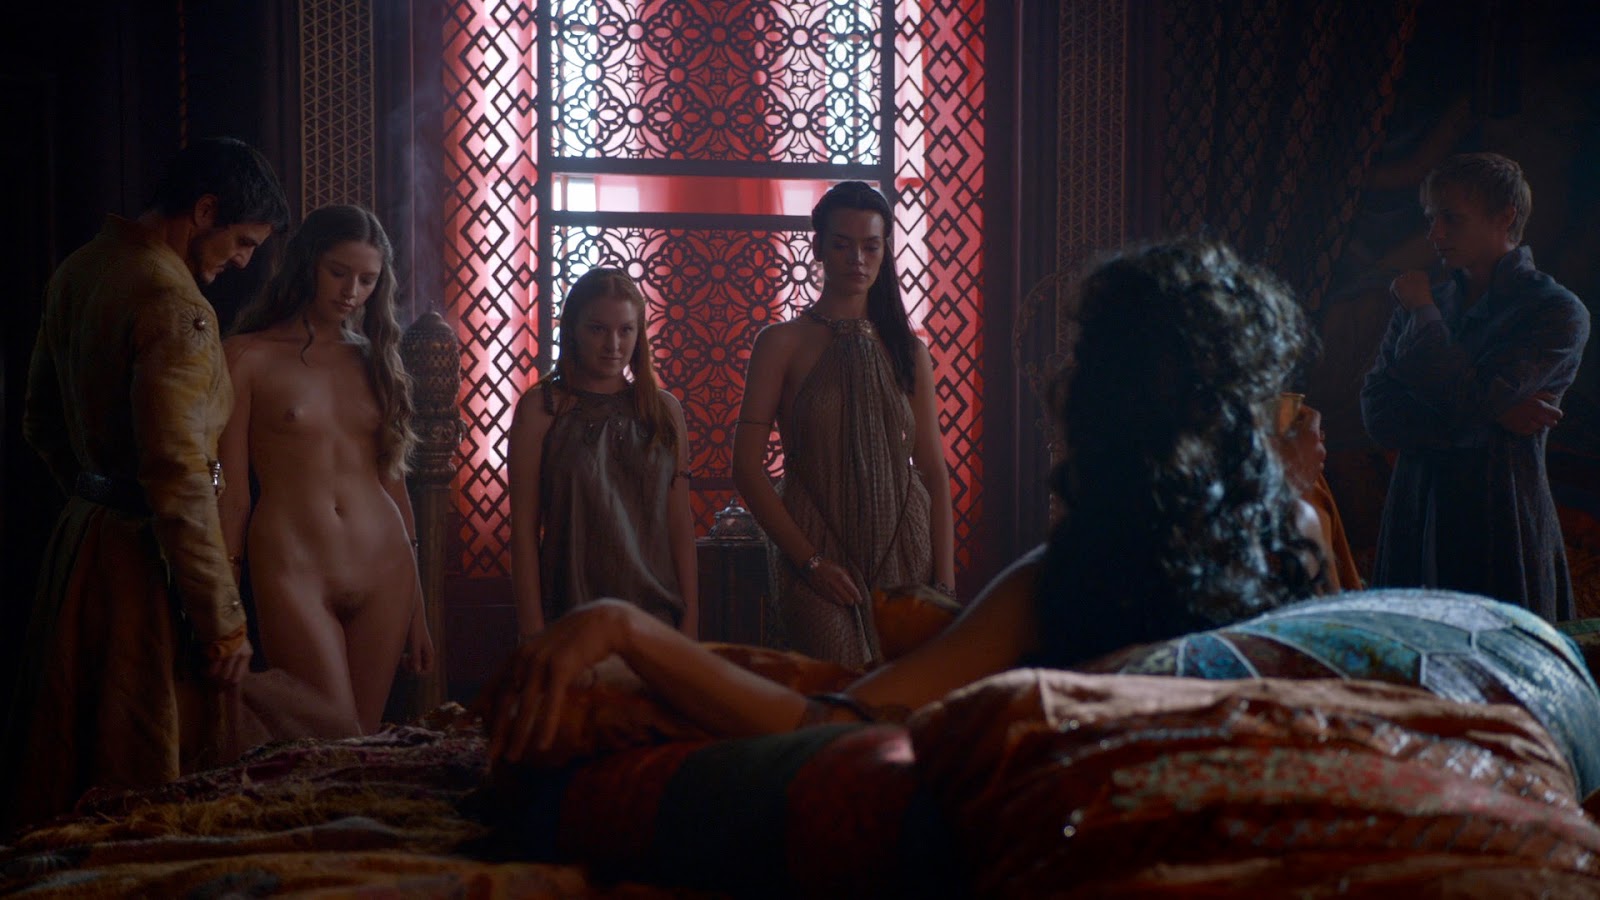 Josephine Gillan & Others - Game of Thrones S03 & S04 (2013) HD.